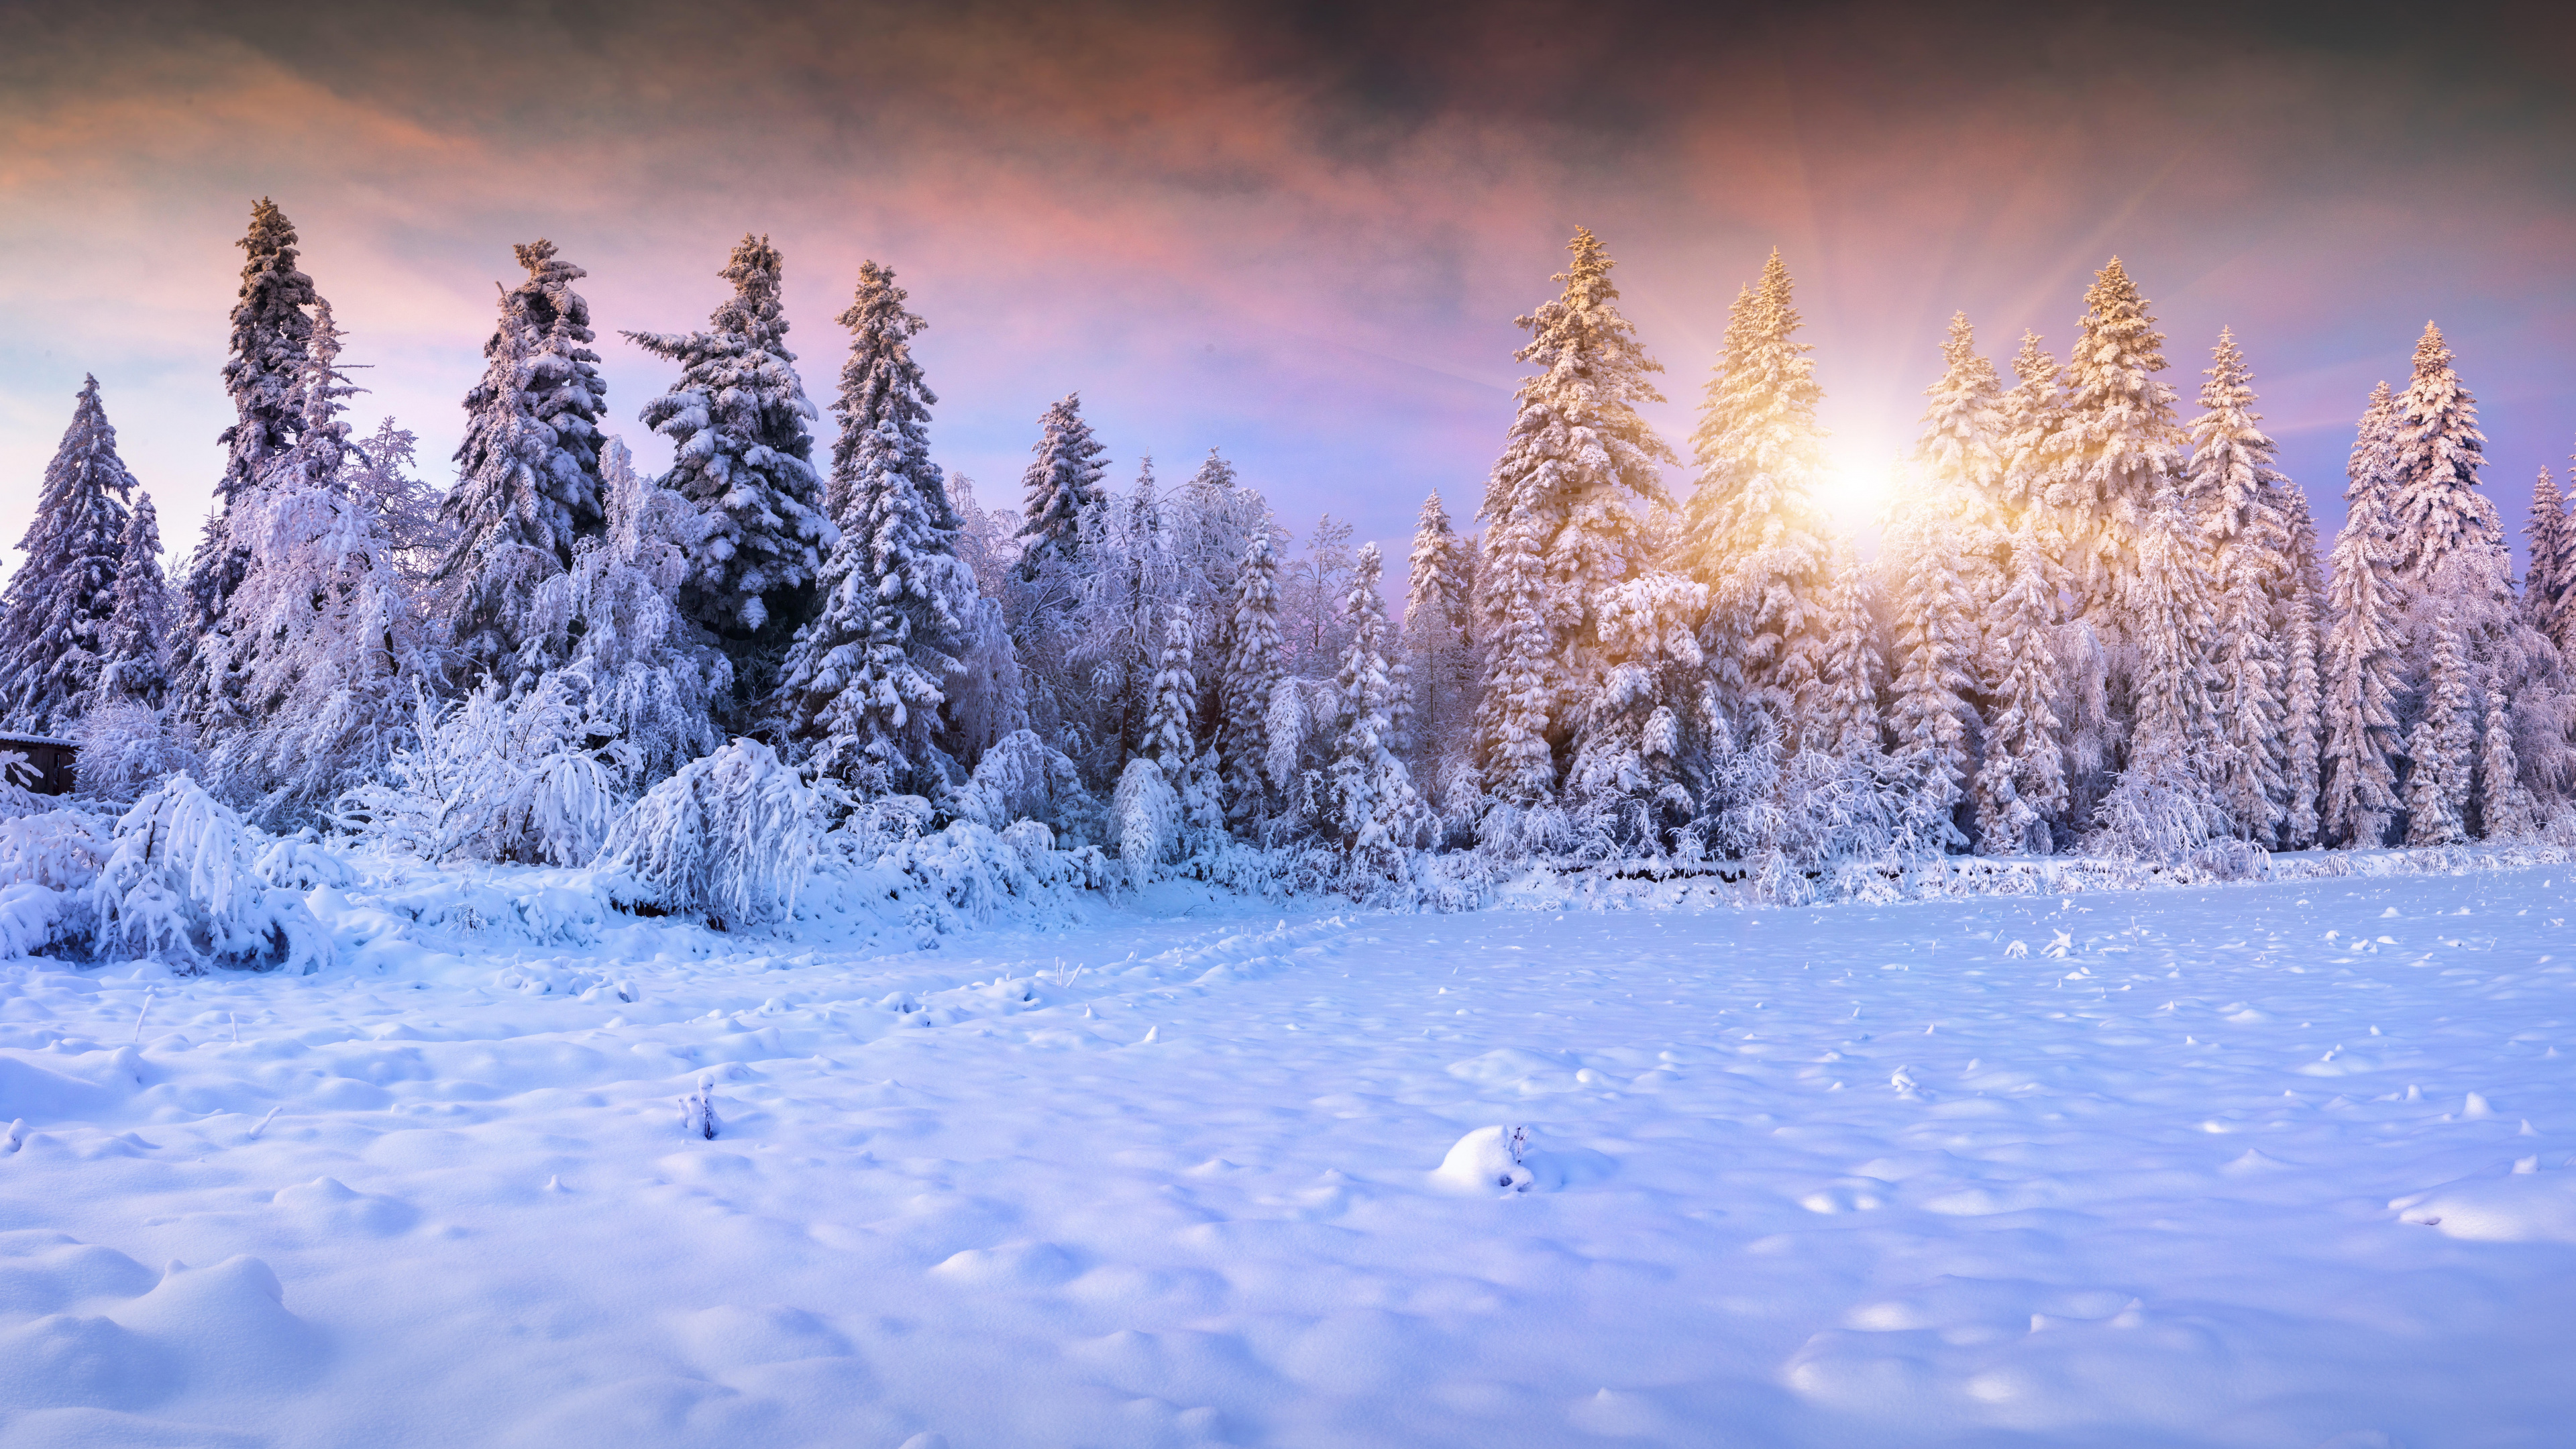 Snow Covered Trees During Daytime. Wallpaper in 3840x2160 Resolution